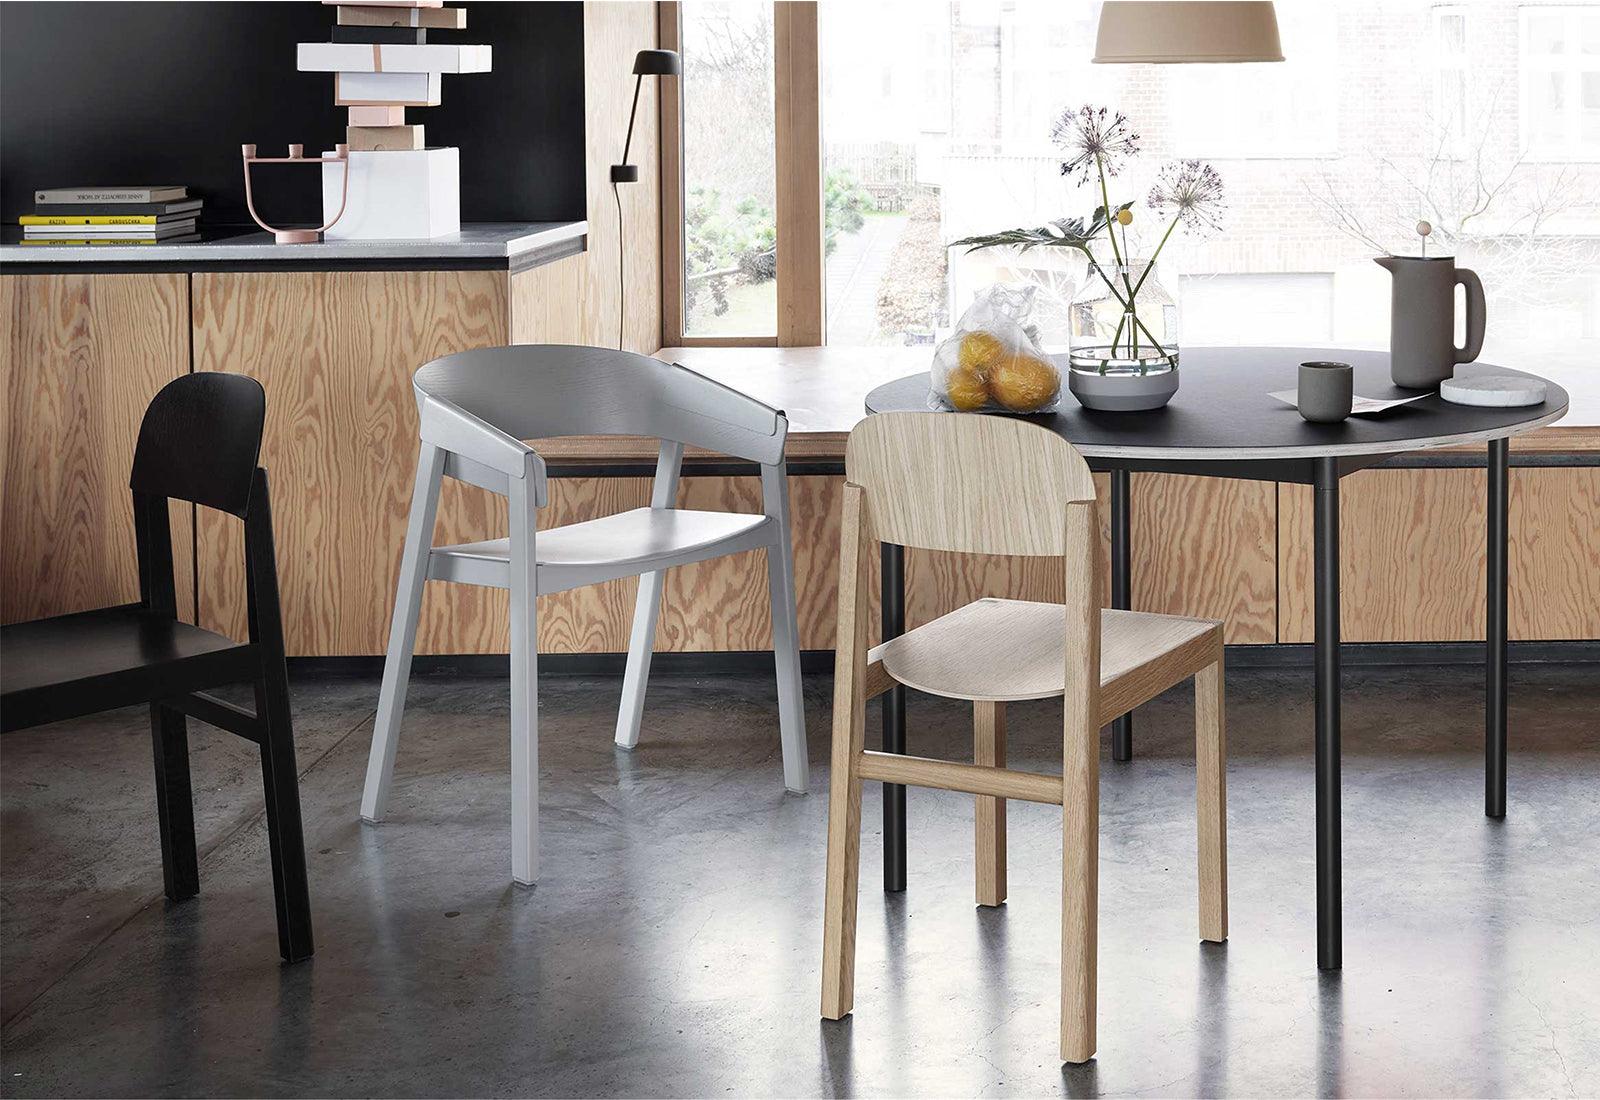  The Workshop chair by Cecilie Manz for Muuto at a round table.